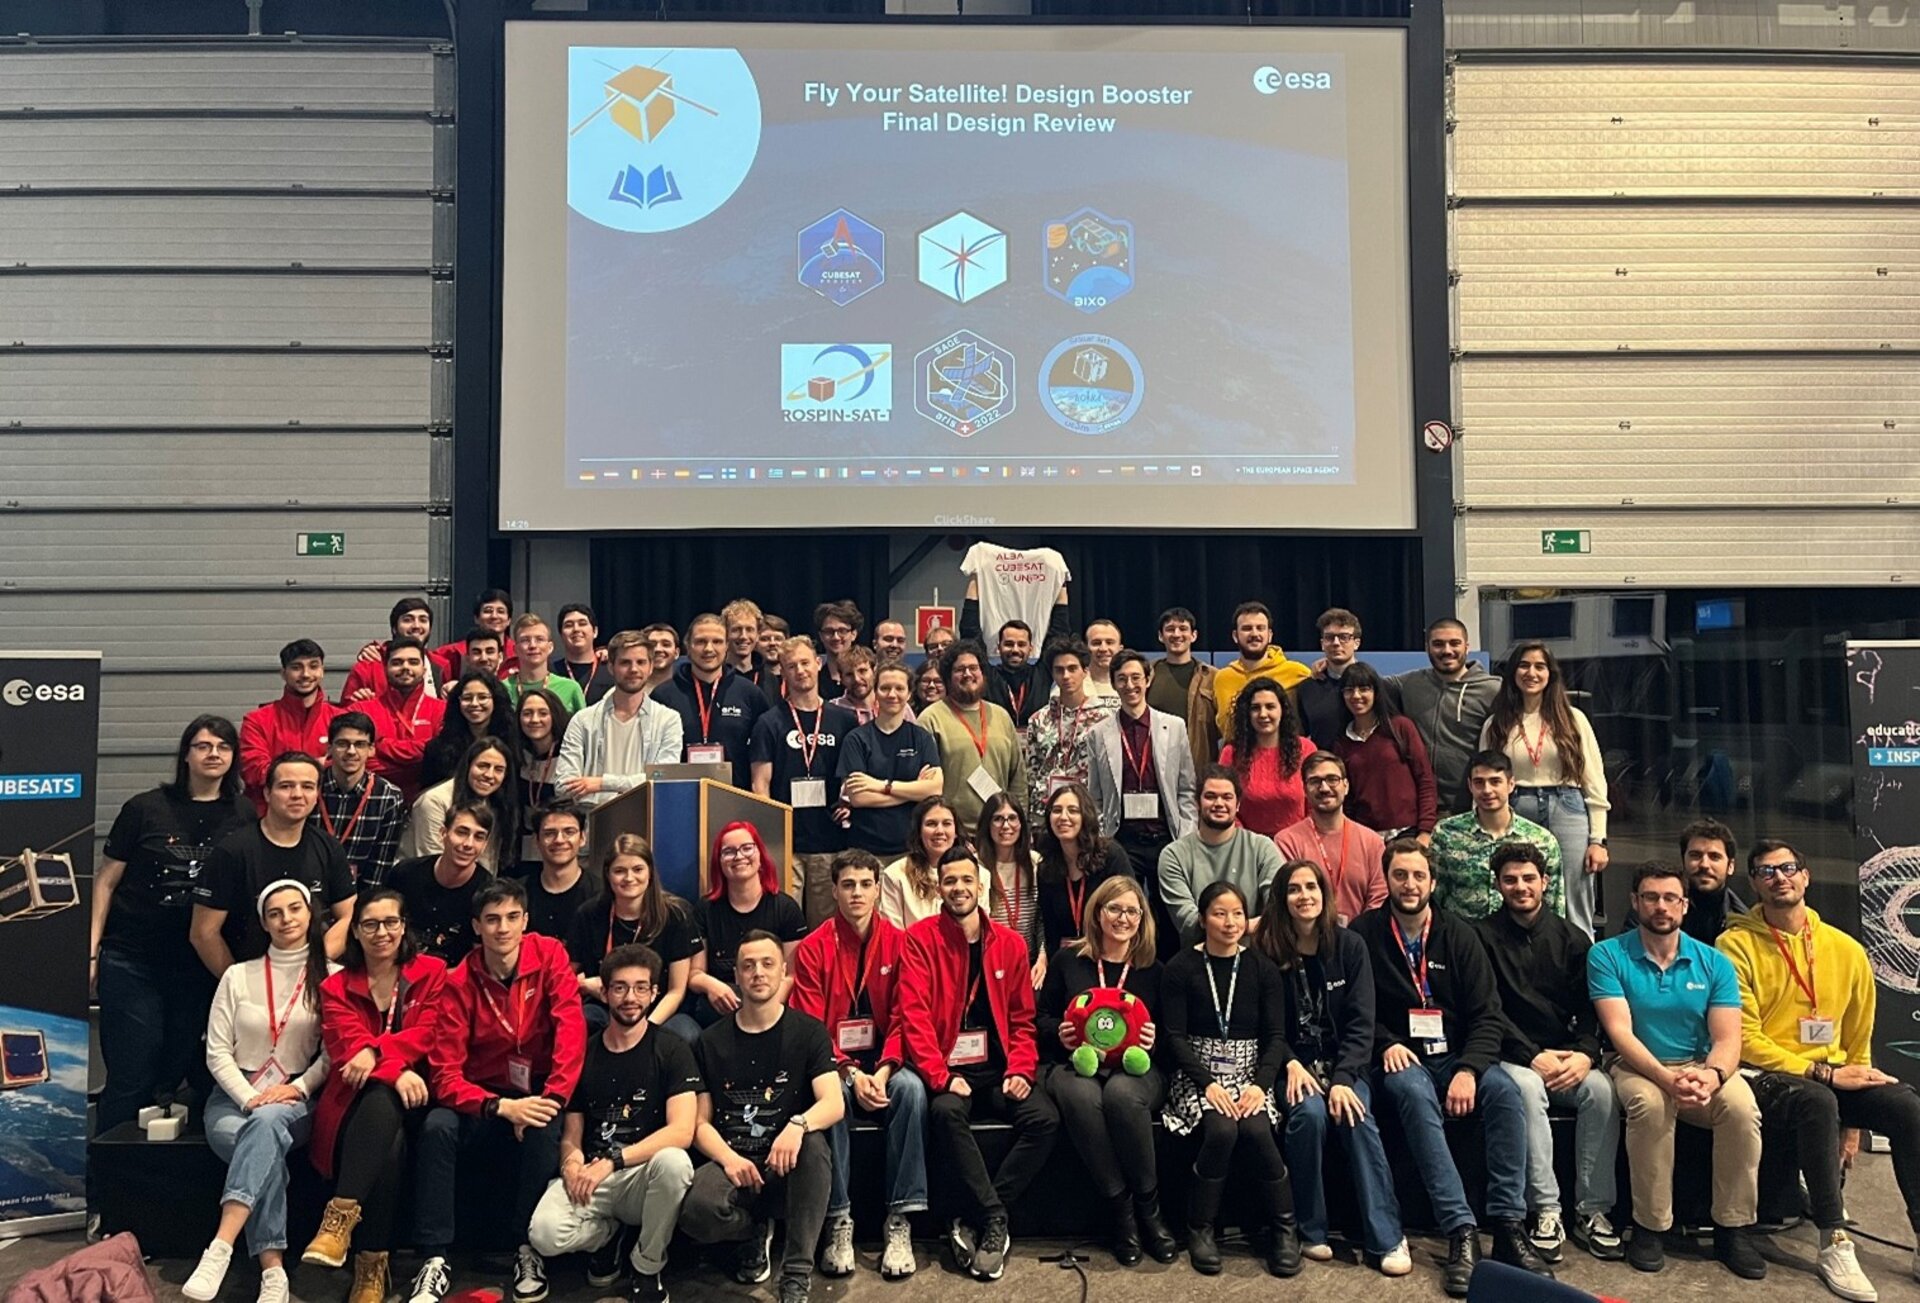 Group picture during Fly Your Satellite! Final Design Review at ESTEC, The Netherlands